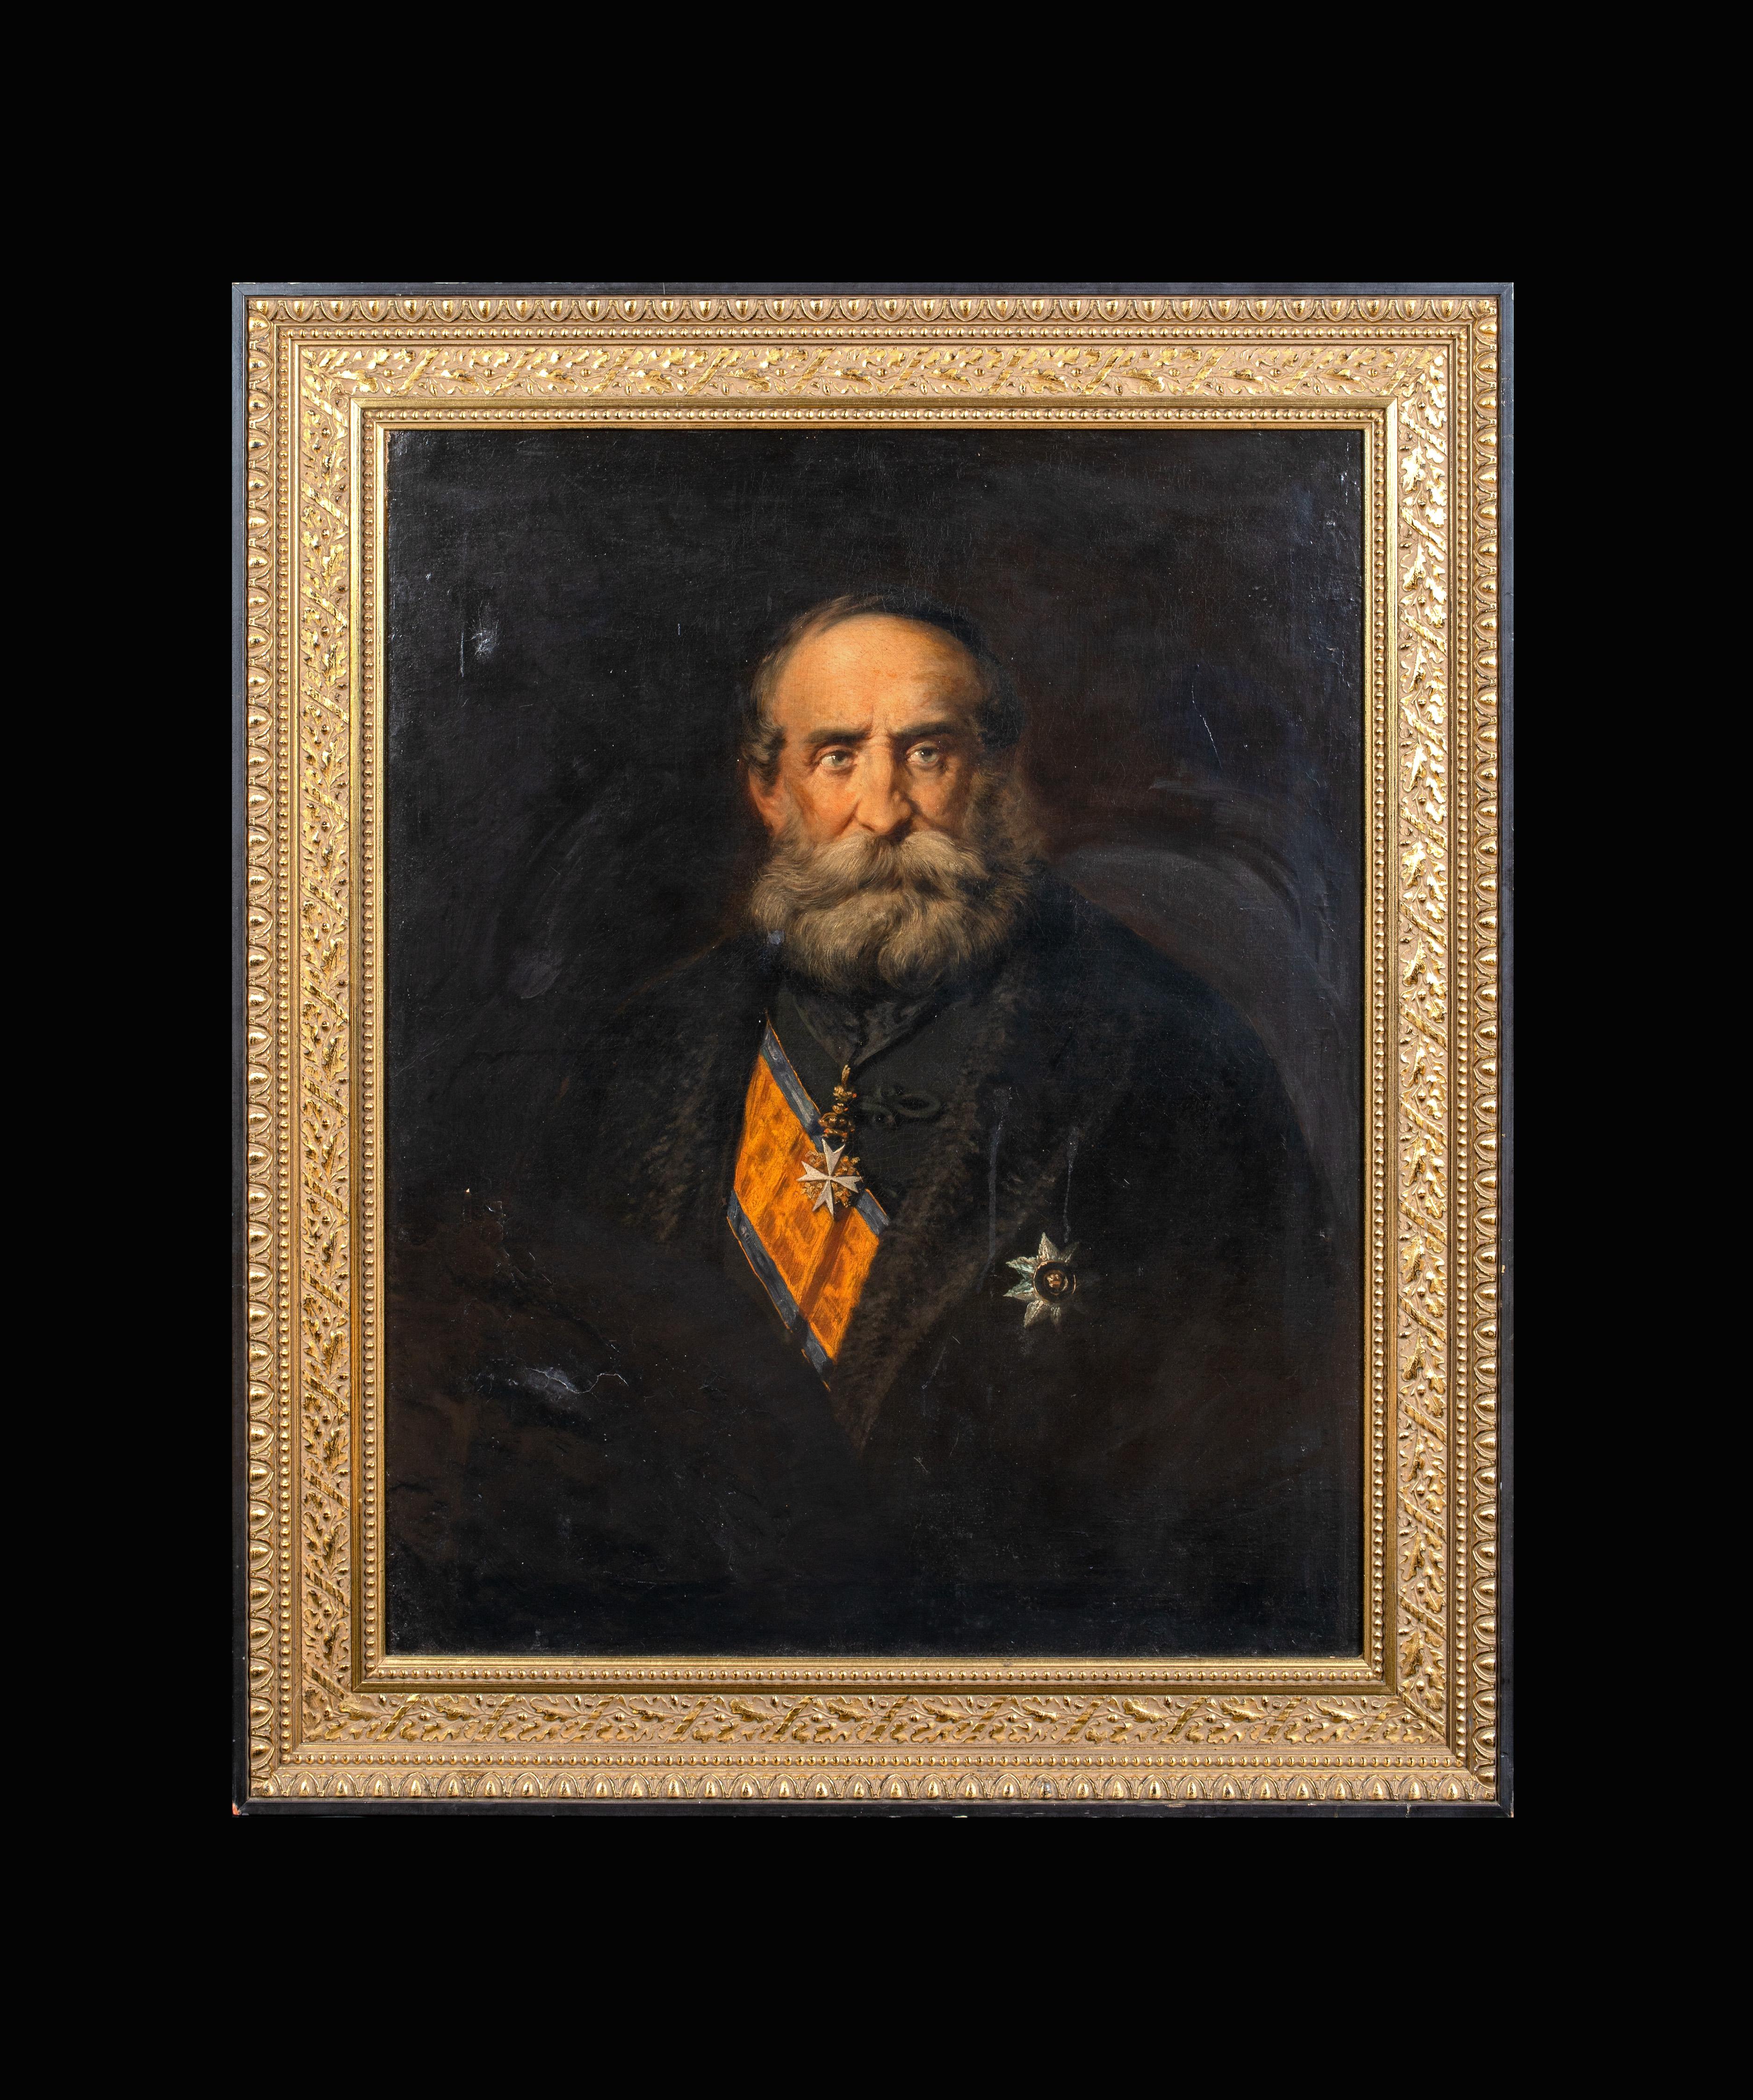 Portrait Of Giuseppe Garibaldi (1807-1882), 19th Century - Painting by Unknown